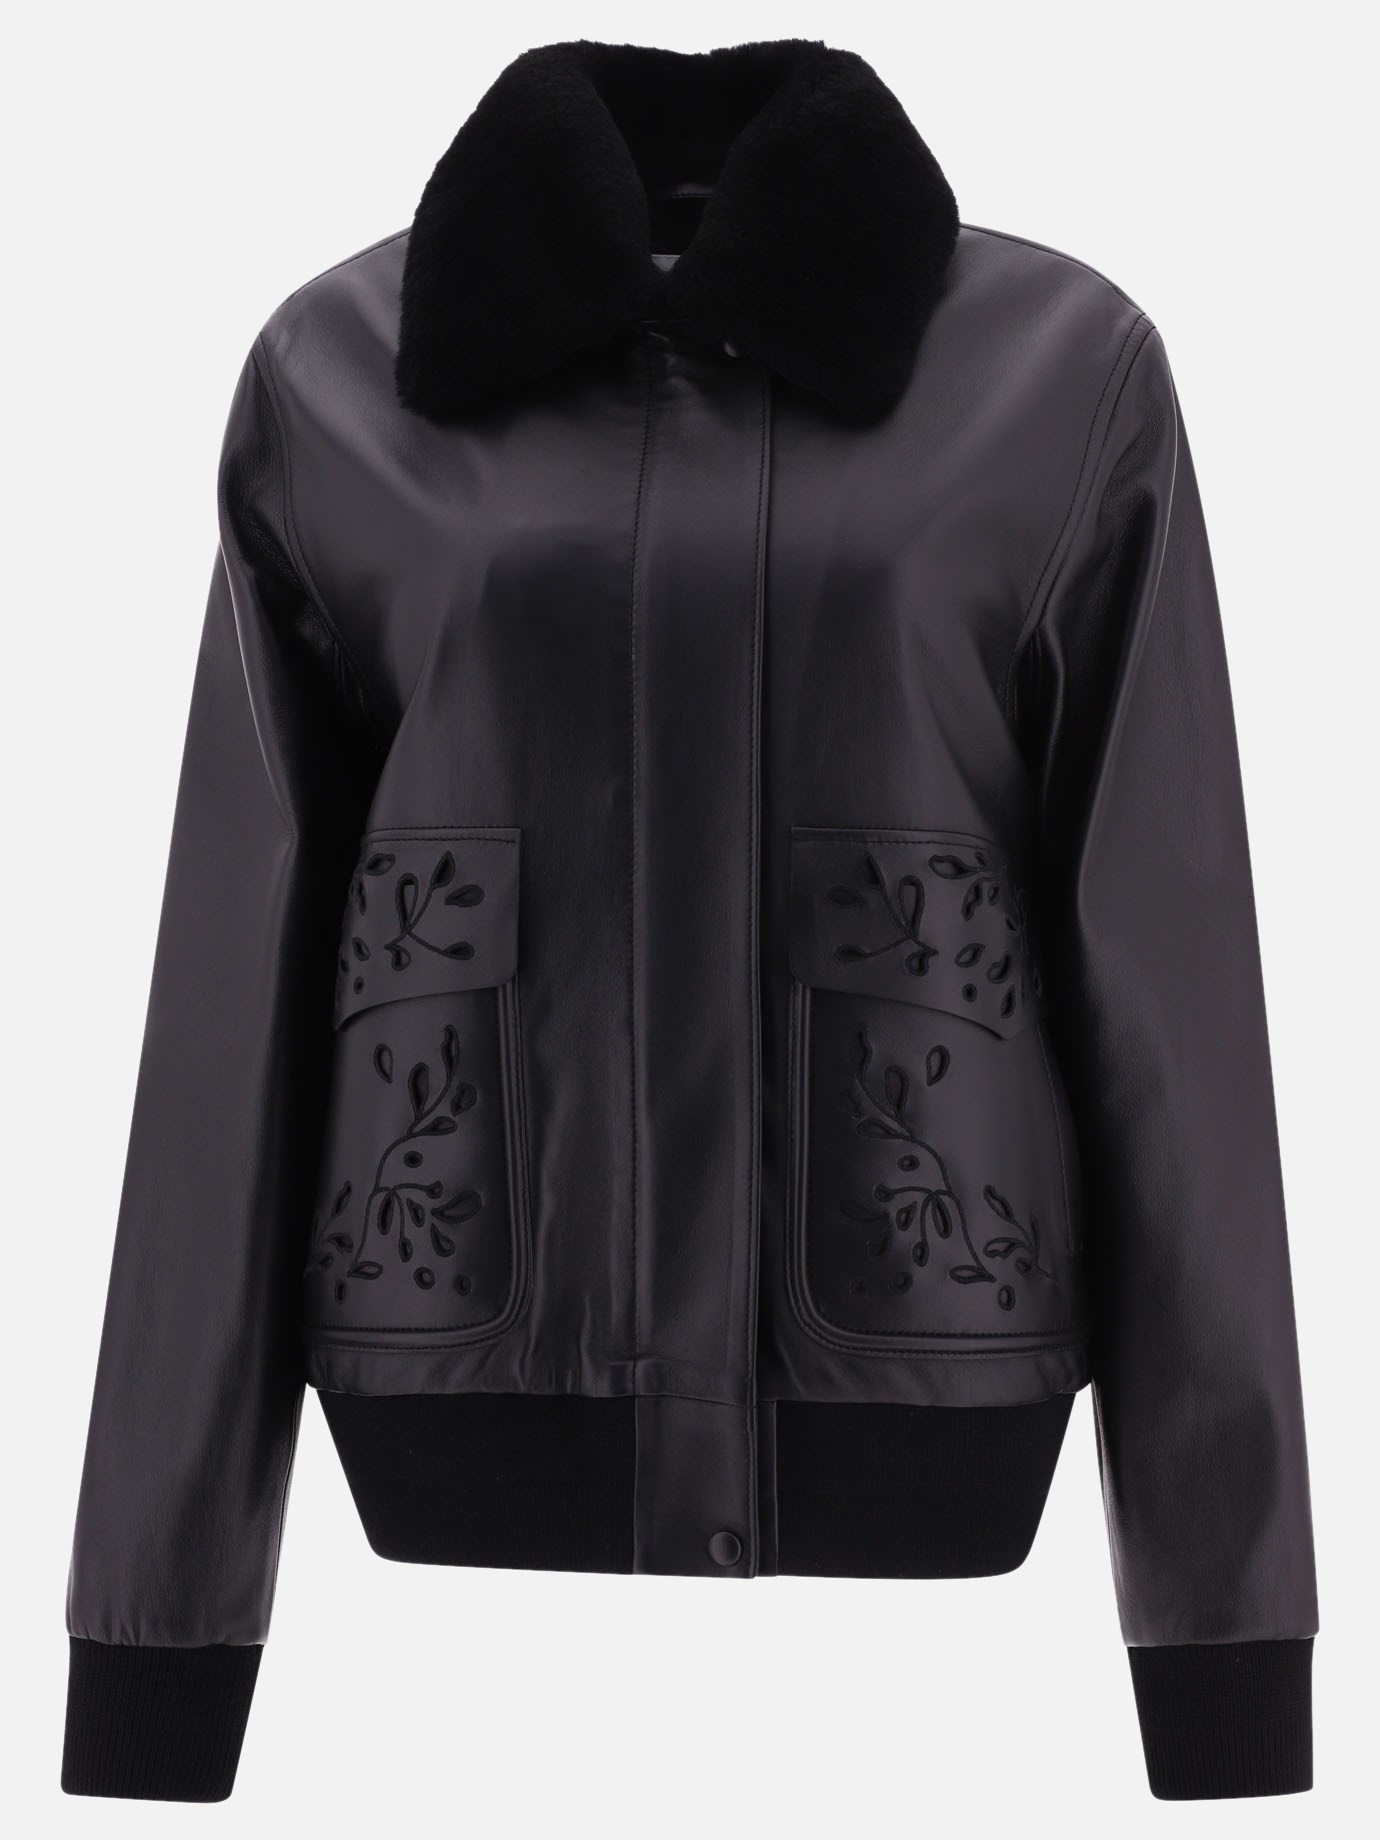 Jacket with embroideryby Chloé - 1